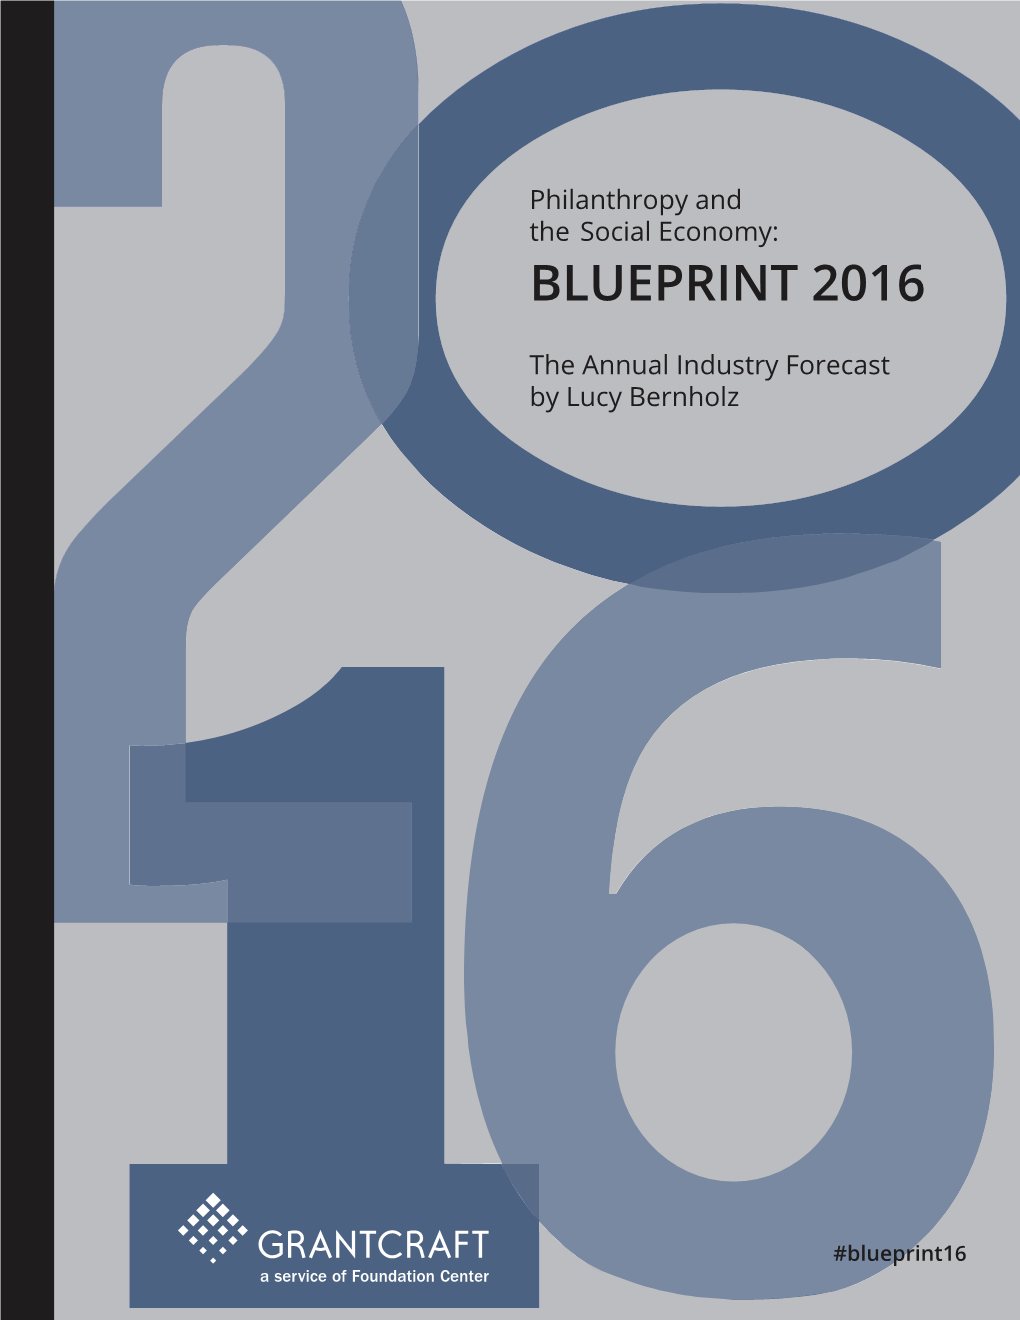 Philanthropy and the Social Economy: Blueprint 2016 Is an Annual Industry Forecast About the Ways We Use Private Resources for Public Benefit